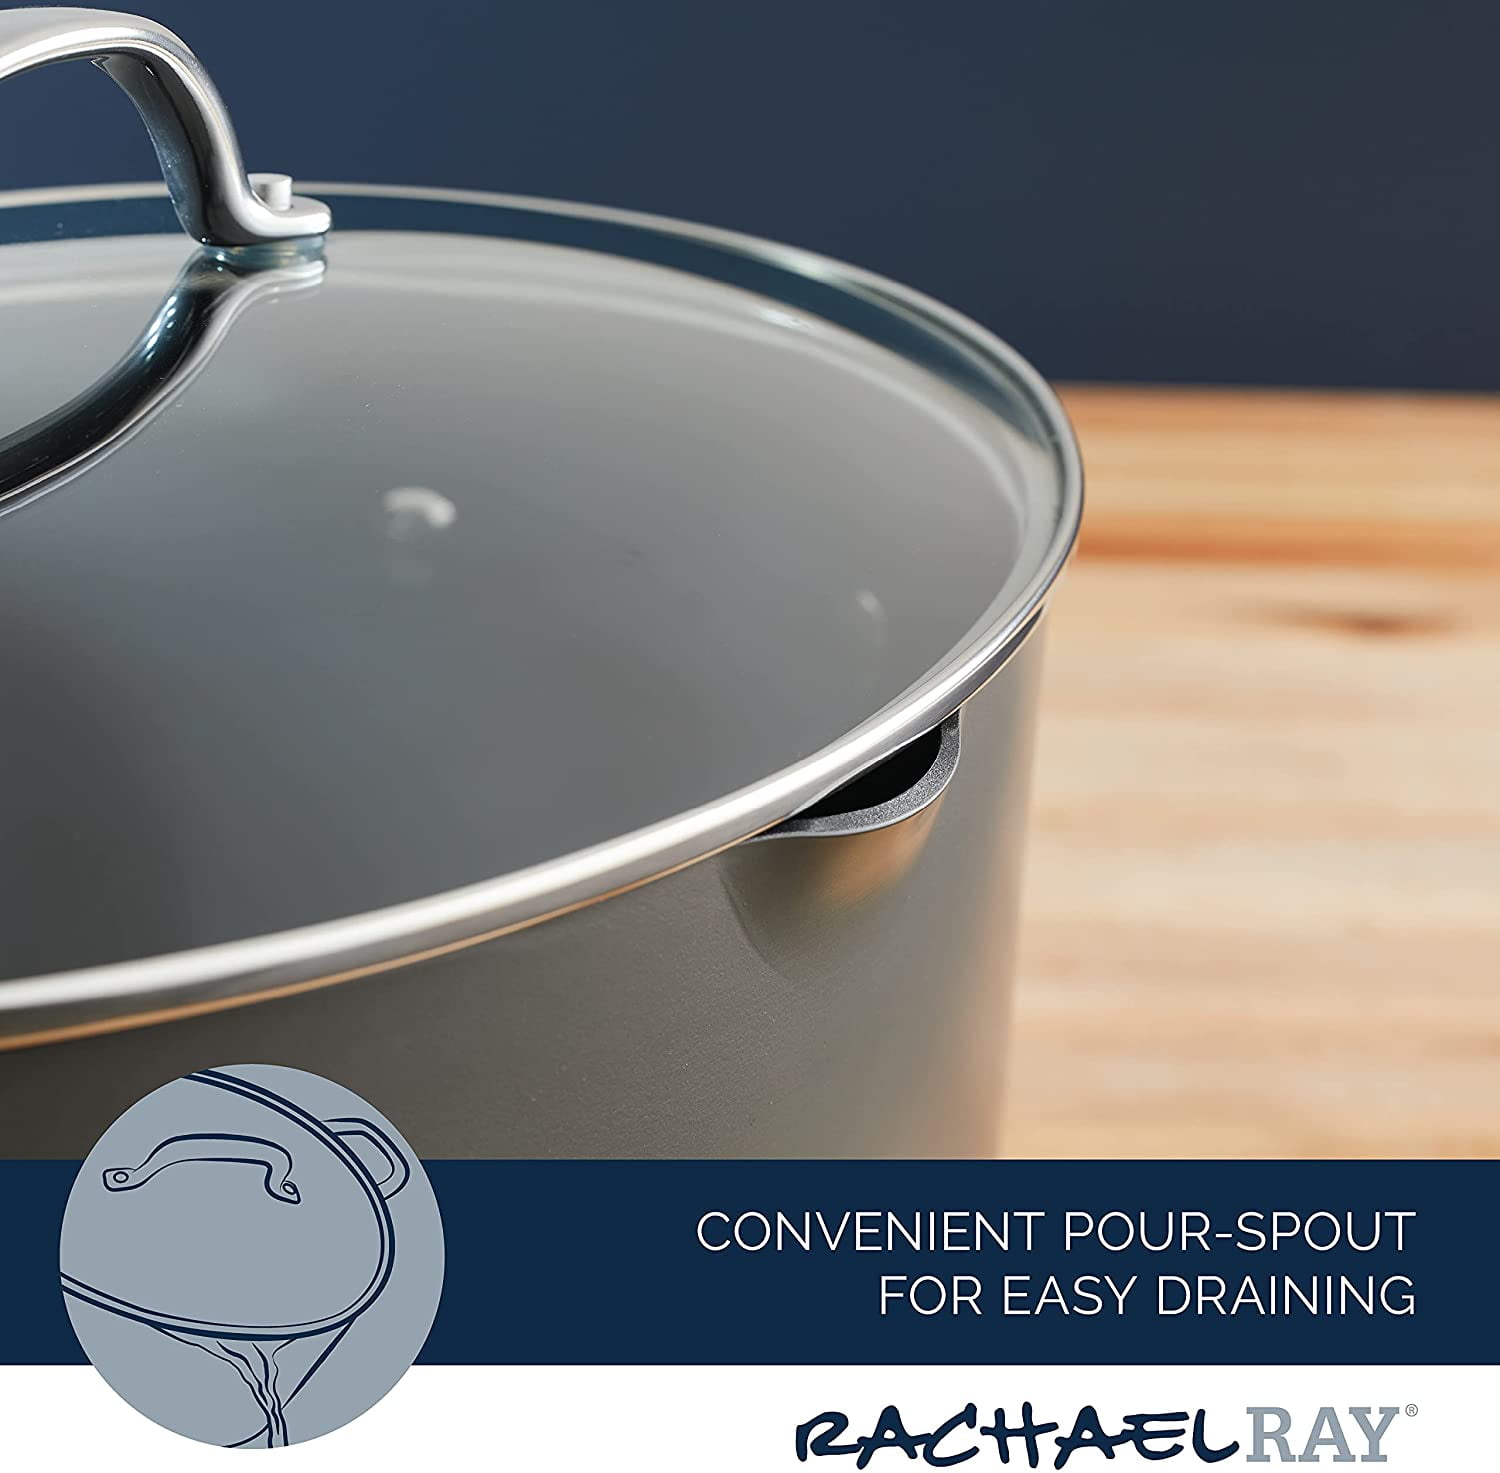 Rachael Ray Hard Anodized Nonstick 8 qt. Covered Oval Pasta Pot 